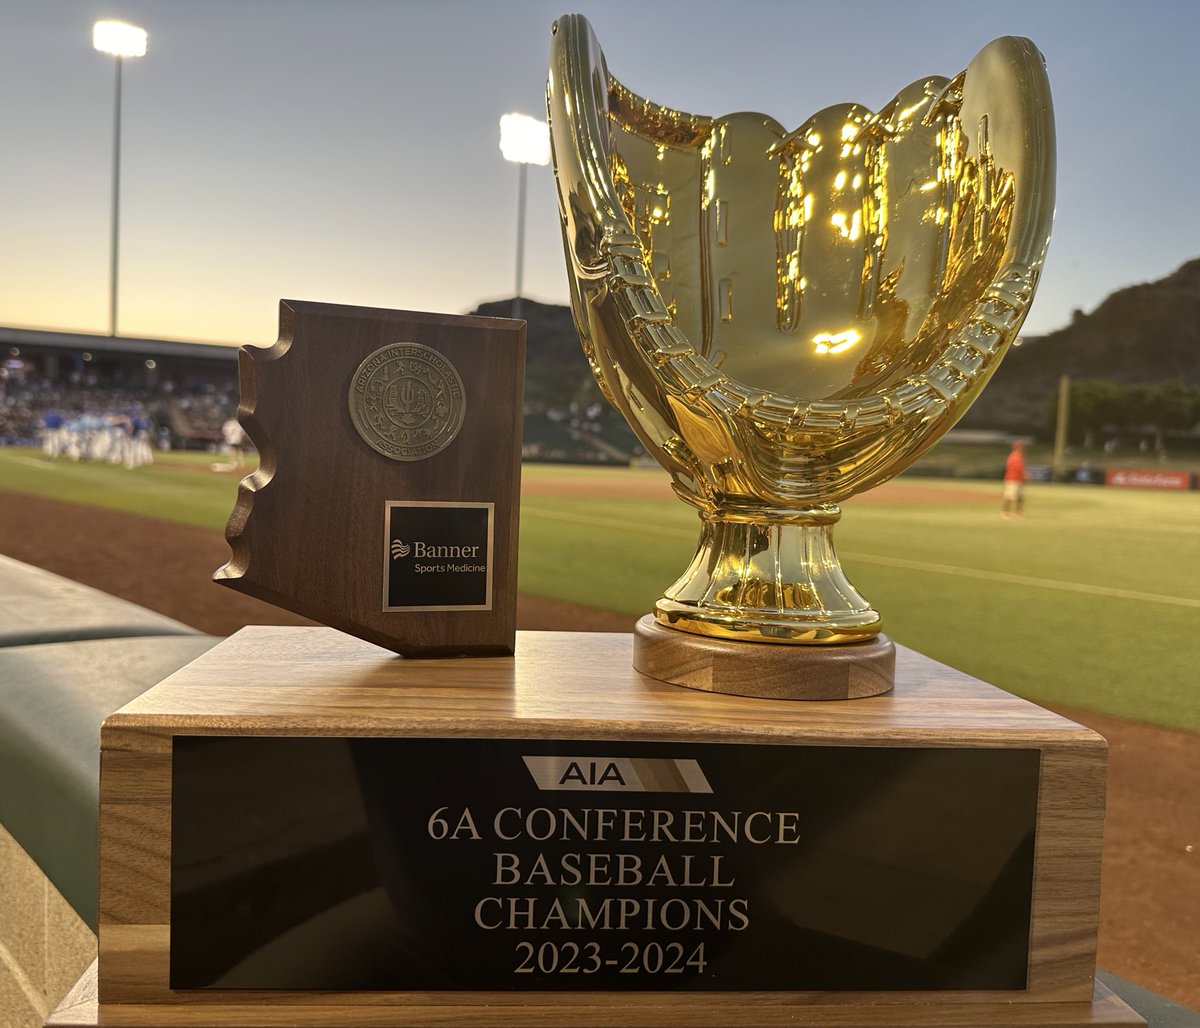 In the nightcap @QCHS_Baseball and @SDOathletics are set to put a lid on this OUTSTANDING @AZPreps365 athletic year. The 6A STATE CHAMPIONSHIP and bragging rights are on the line. Play Ball! @AZPreps365Jose @azc_obert @KevinMcCabe987 @ZachAlvira @DrFinchDVUSD @QCHS_Athletics